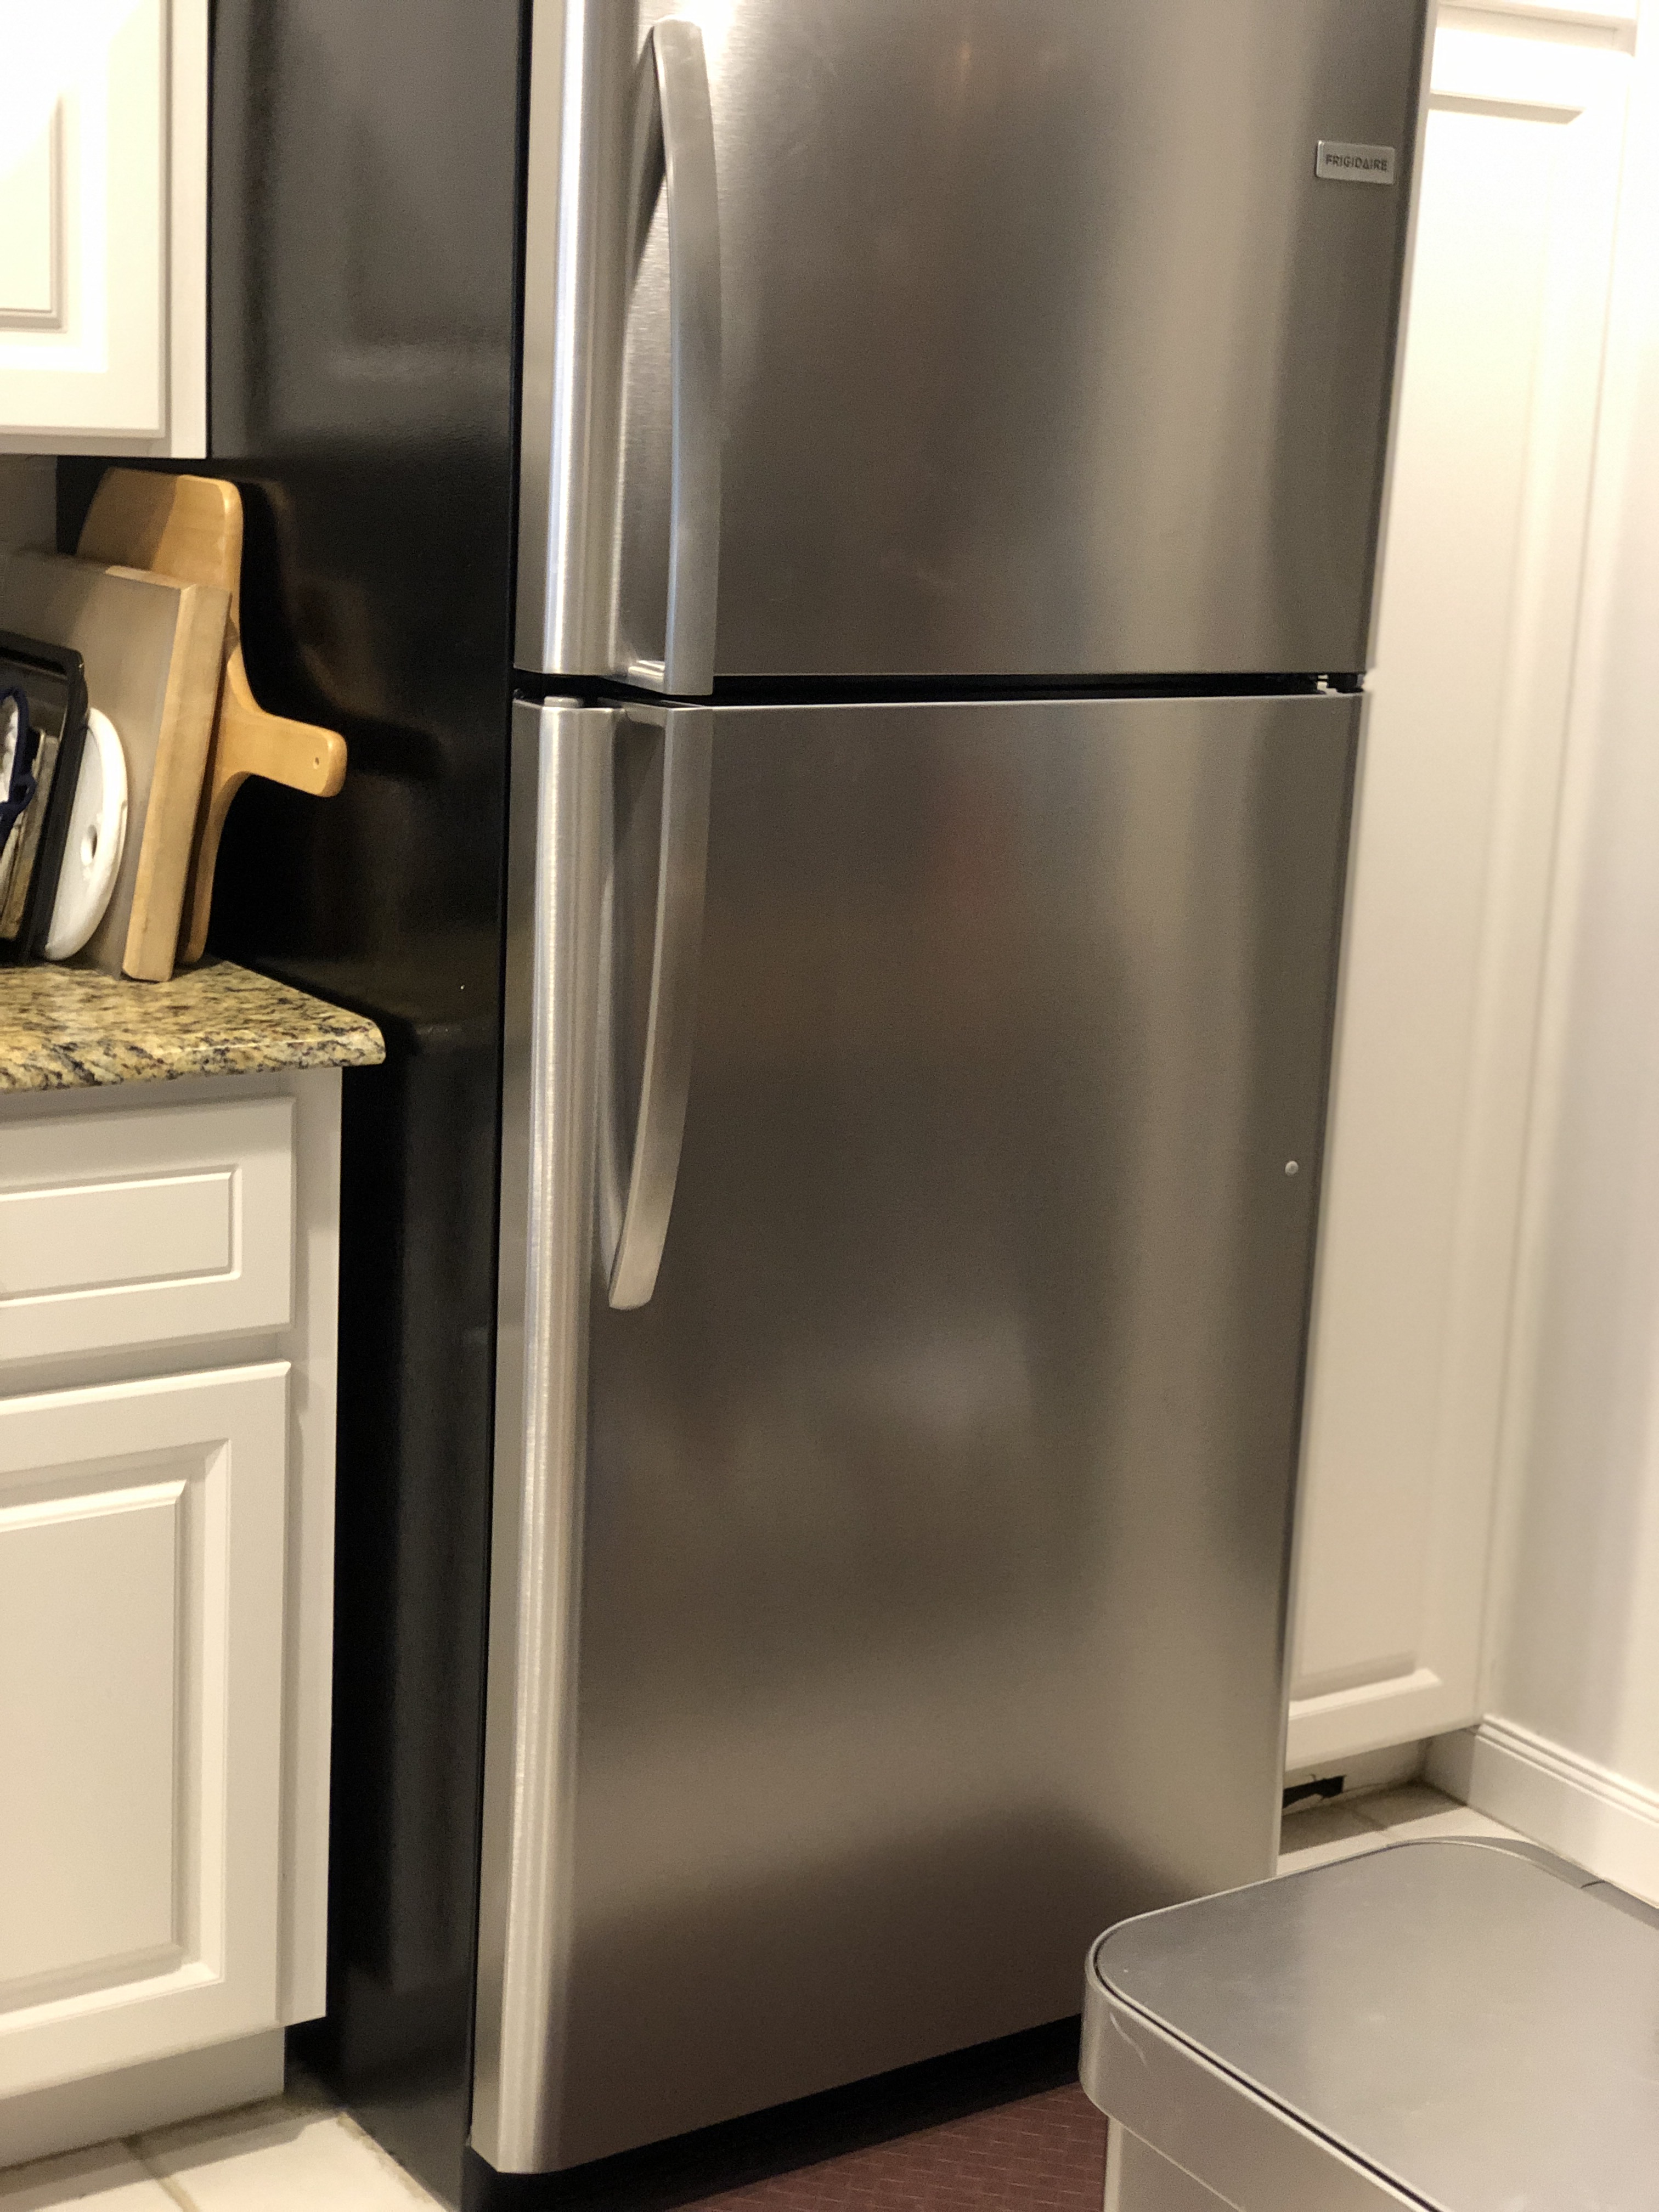 Does Lowe's Install Appliances? (What's Included, Cost + More)